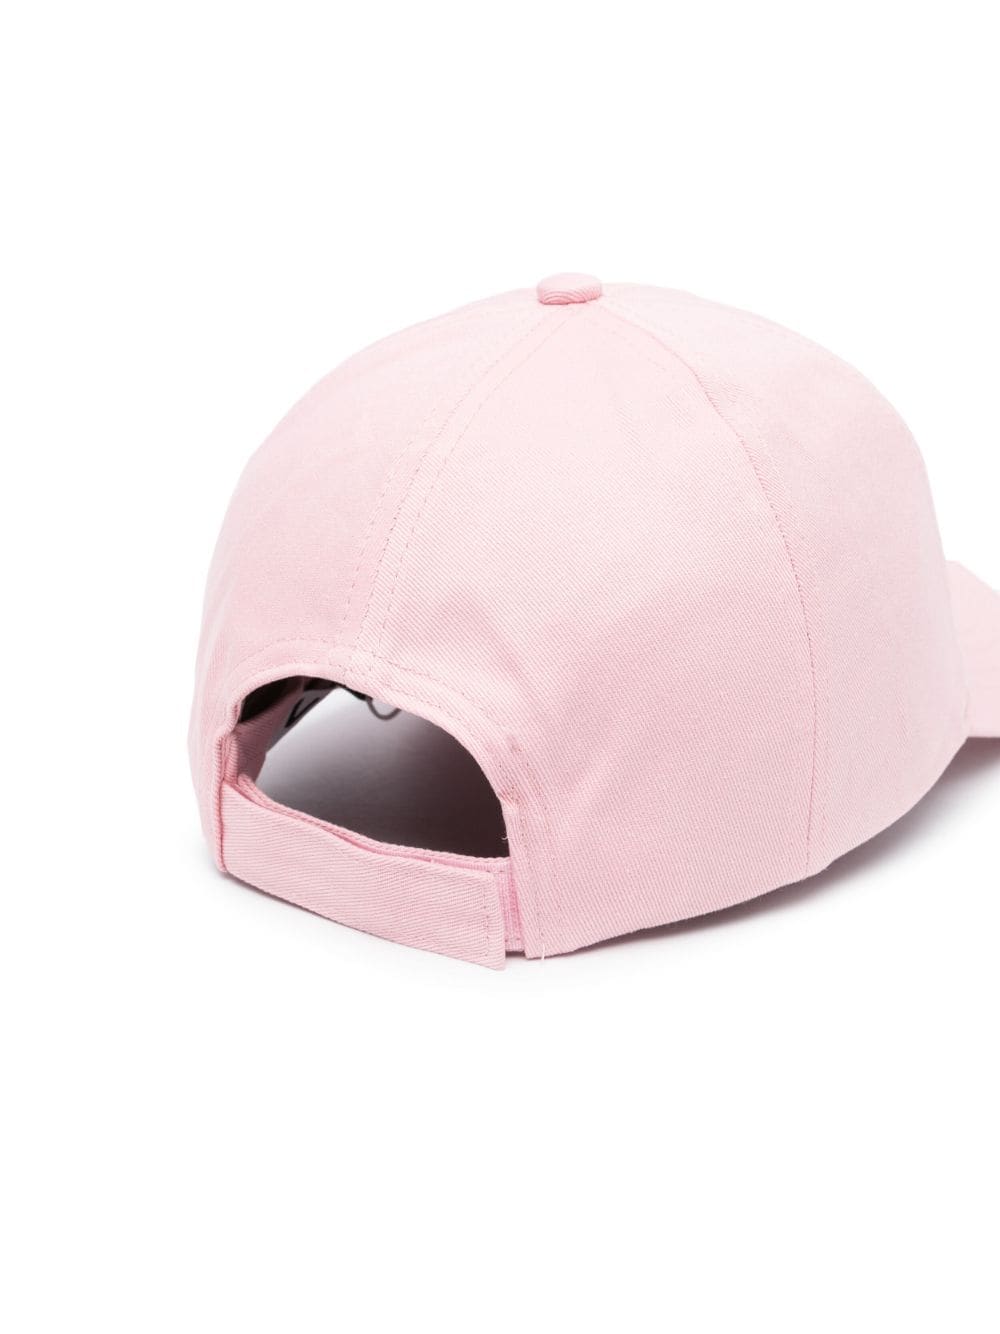 Ganni, Embroidered-logo cotton baseball cap in light pink, sold by My o My Helsinki